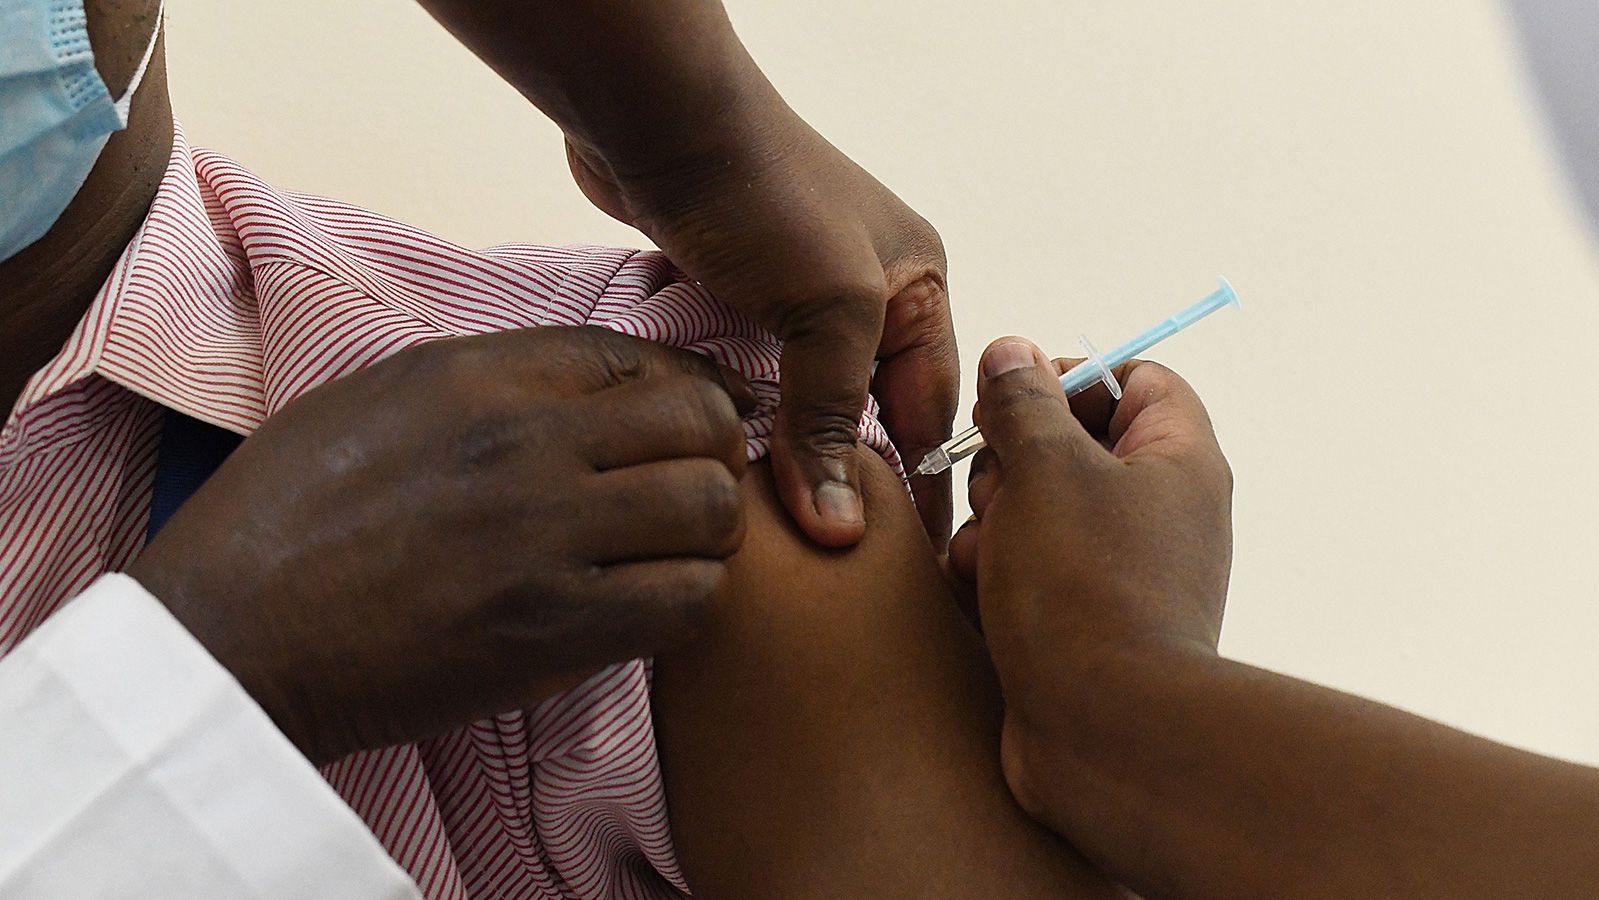 A Kenyan health worker receives a dose of the Oxford/AstraZeneca vaccine, part of the COVAX mechanism by GAVI (The Vaccine Alliance), to fight against COVID-19 at the Kenyatta National Hospital in Nairobi on March 5, 2021.